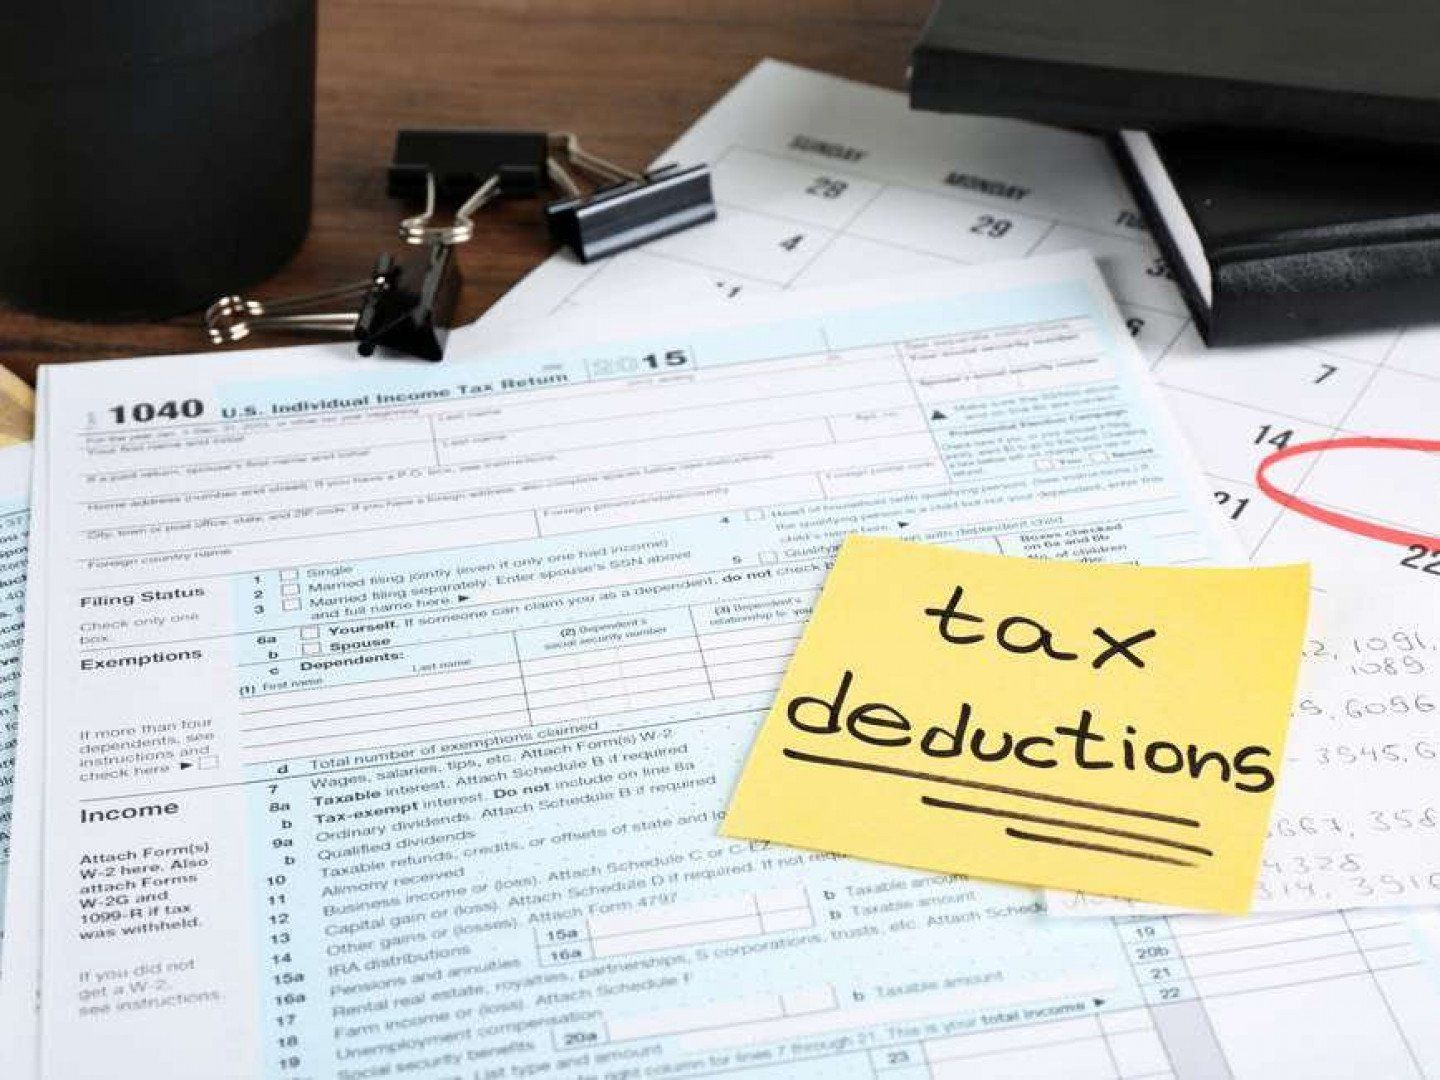 Tax Form With Tax Deductions Note